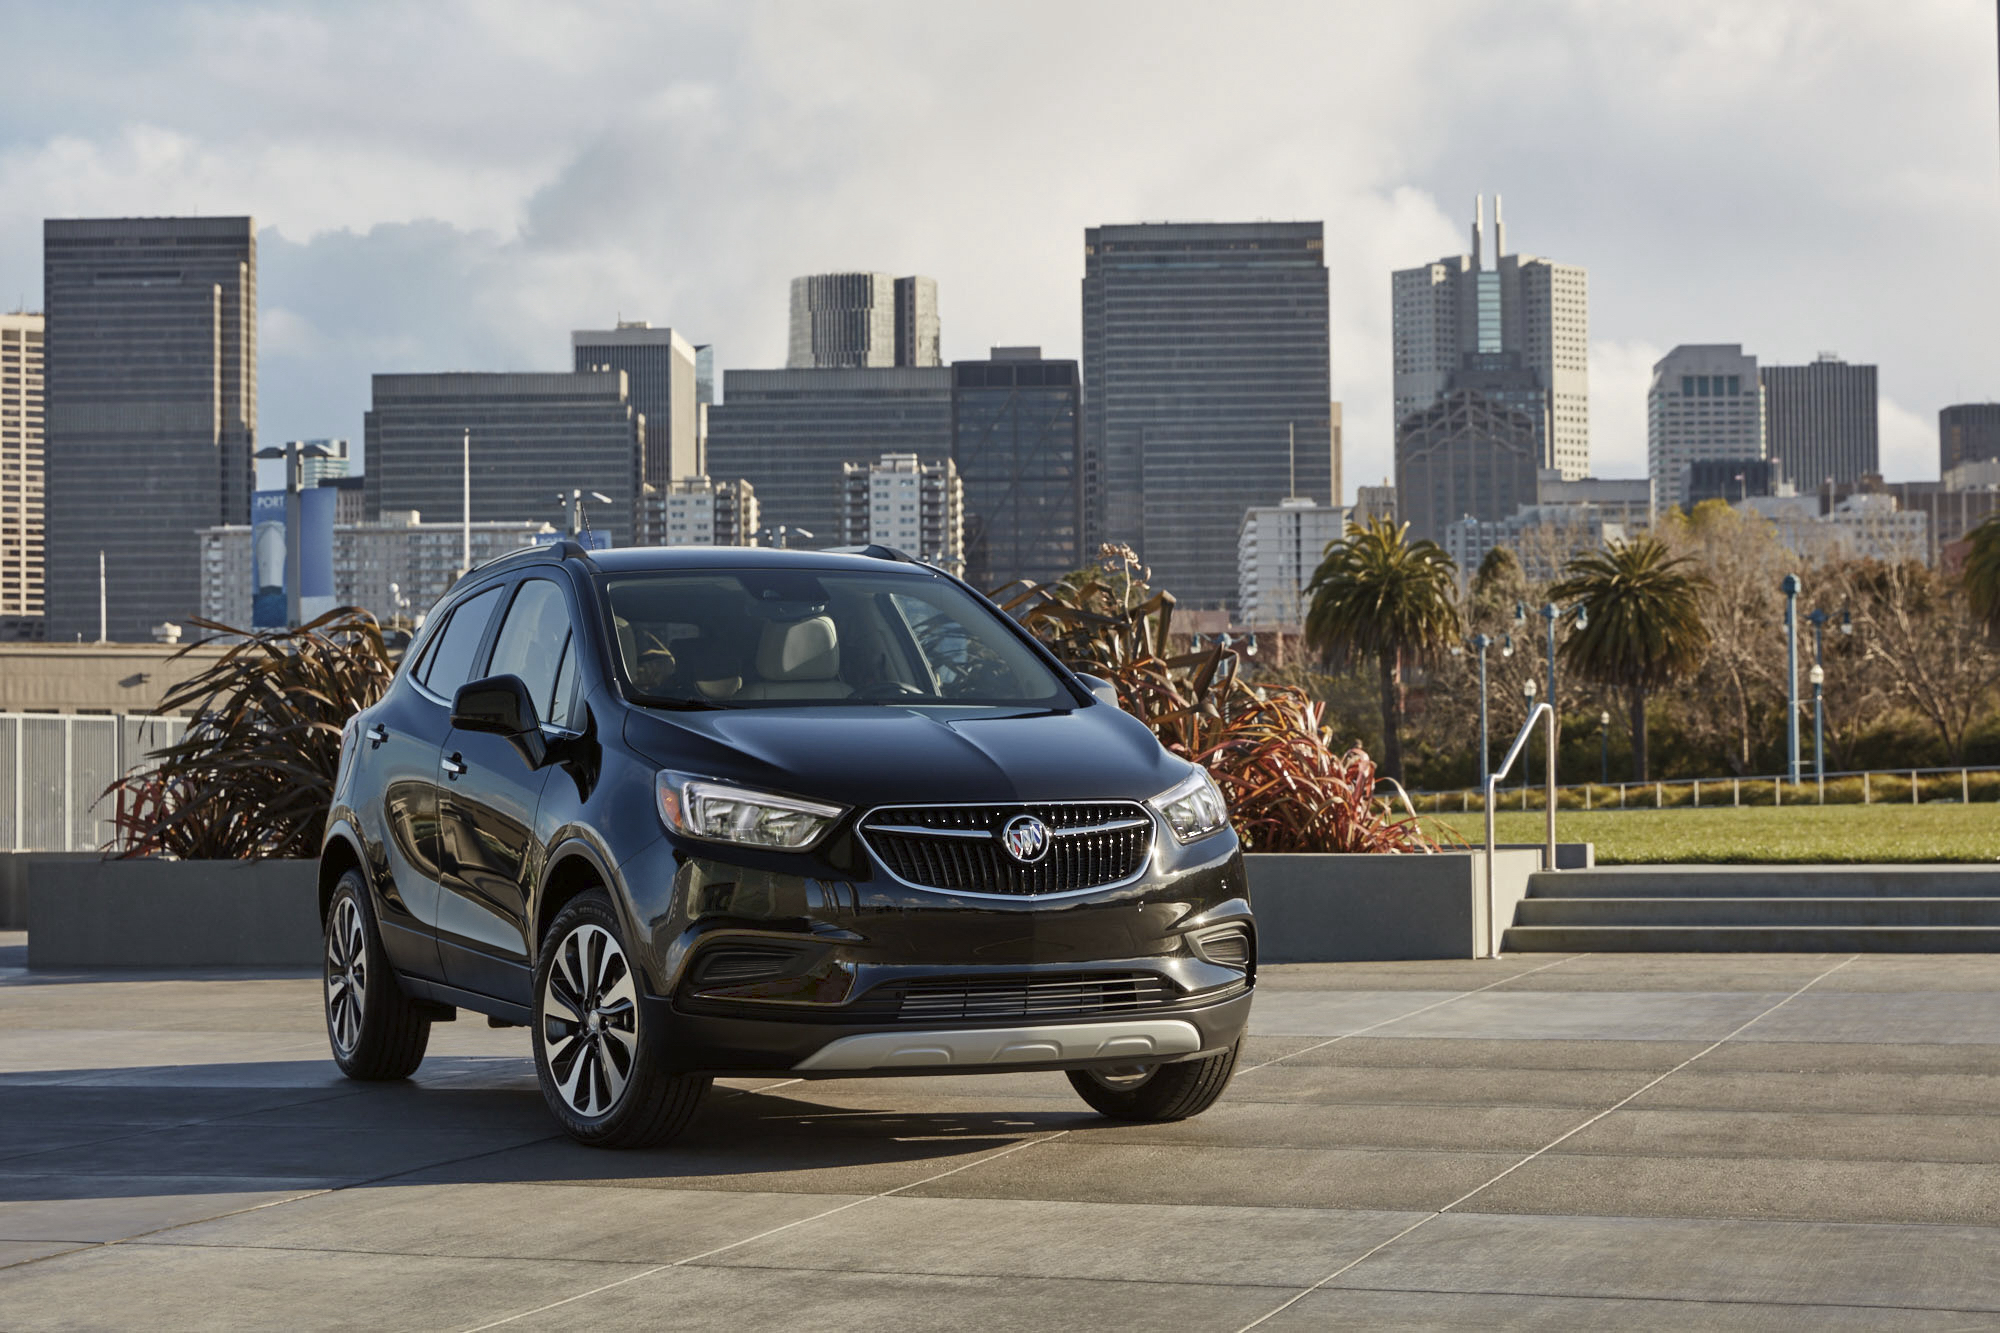 A dark-colored 2021 Buick Encore luxury subcompact SUV parked in front of a city skyline